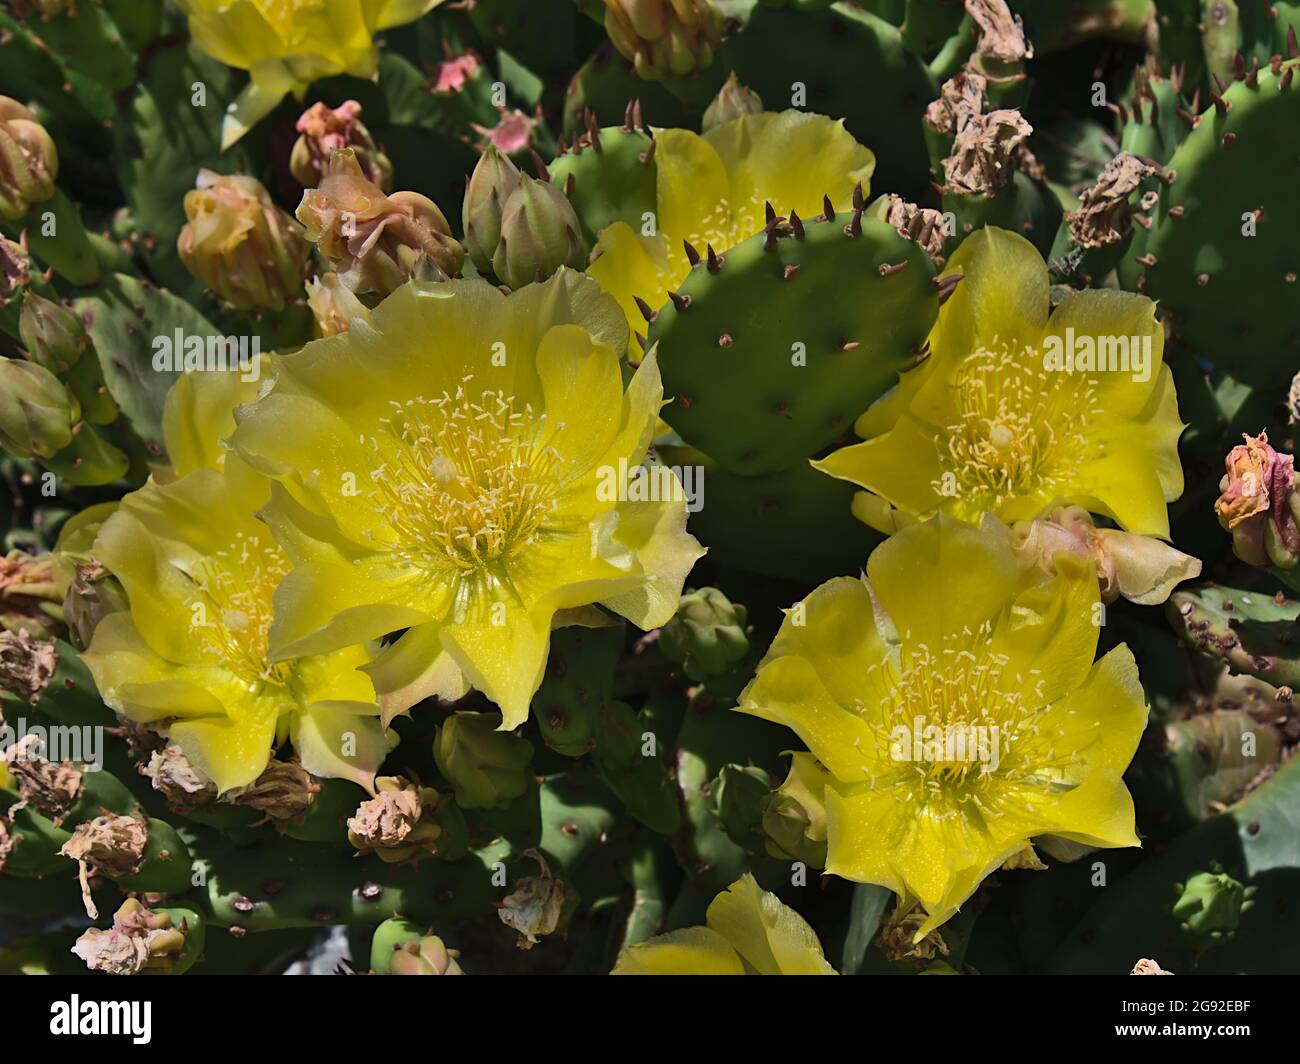 Closeup view of prickly pear flowers (opuntia, cactaceae) with yellow colored blossom and thick green leaves with spines on sunny summer day. Stock Photo